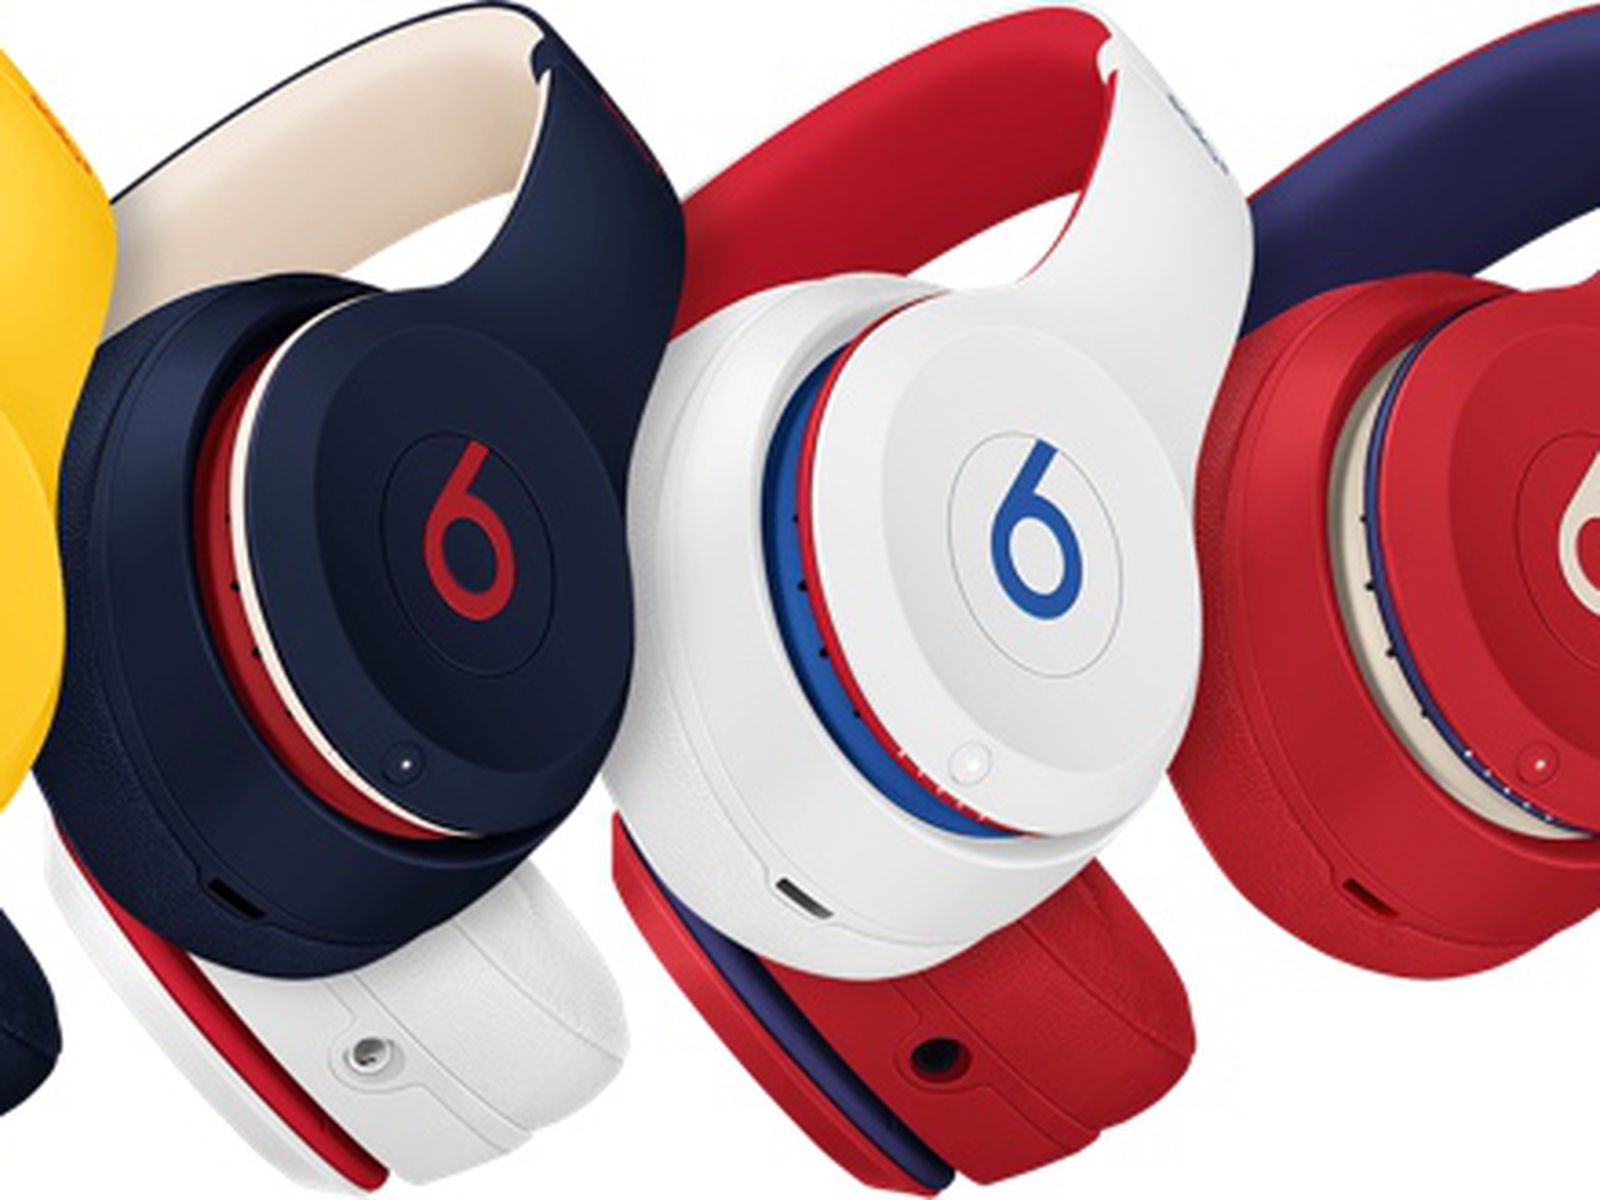 Apple's Beats Brand Launches New 'Beats Club Collection' Solo3 